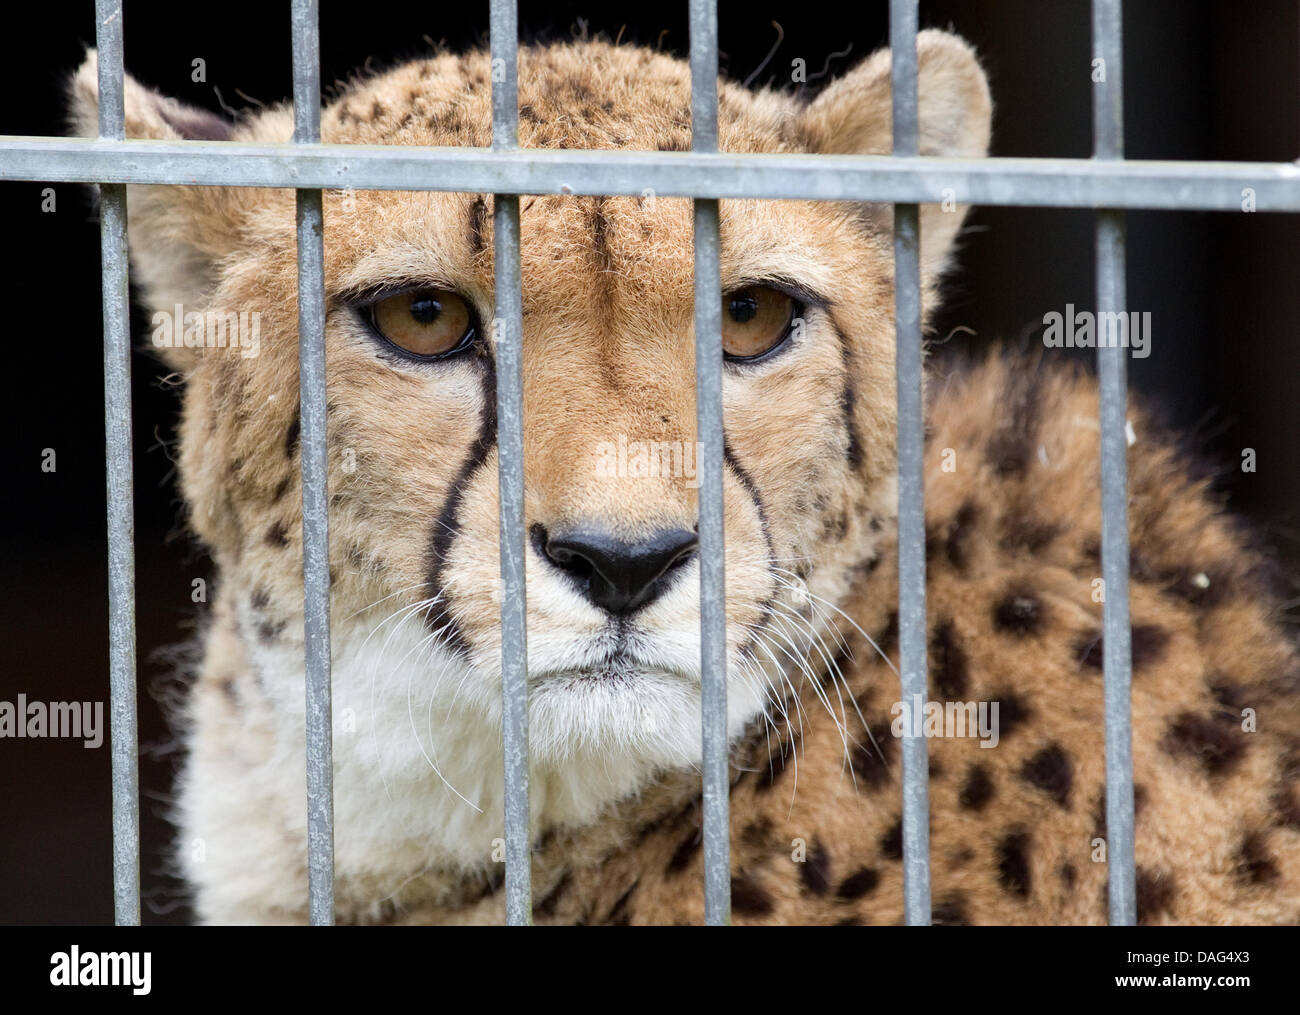 The cheetah Xenia looks through the fence around her enclosure at the Zoo in Muenster, Germany, 16 March 2011. Cheetah and Jabari are supposed to have cubs, but because Cheetah turns out to be very picky, it was not successful so far. Photo: Friso Gentsch Stock Photo